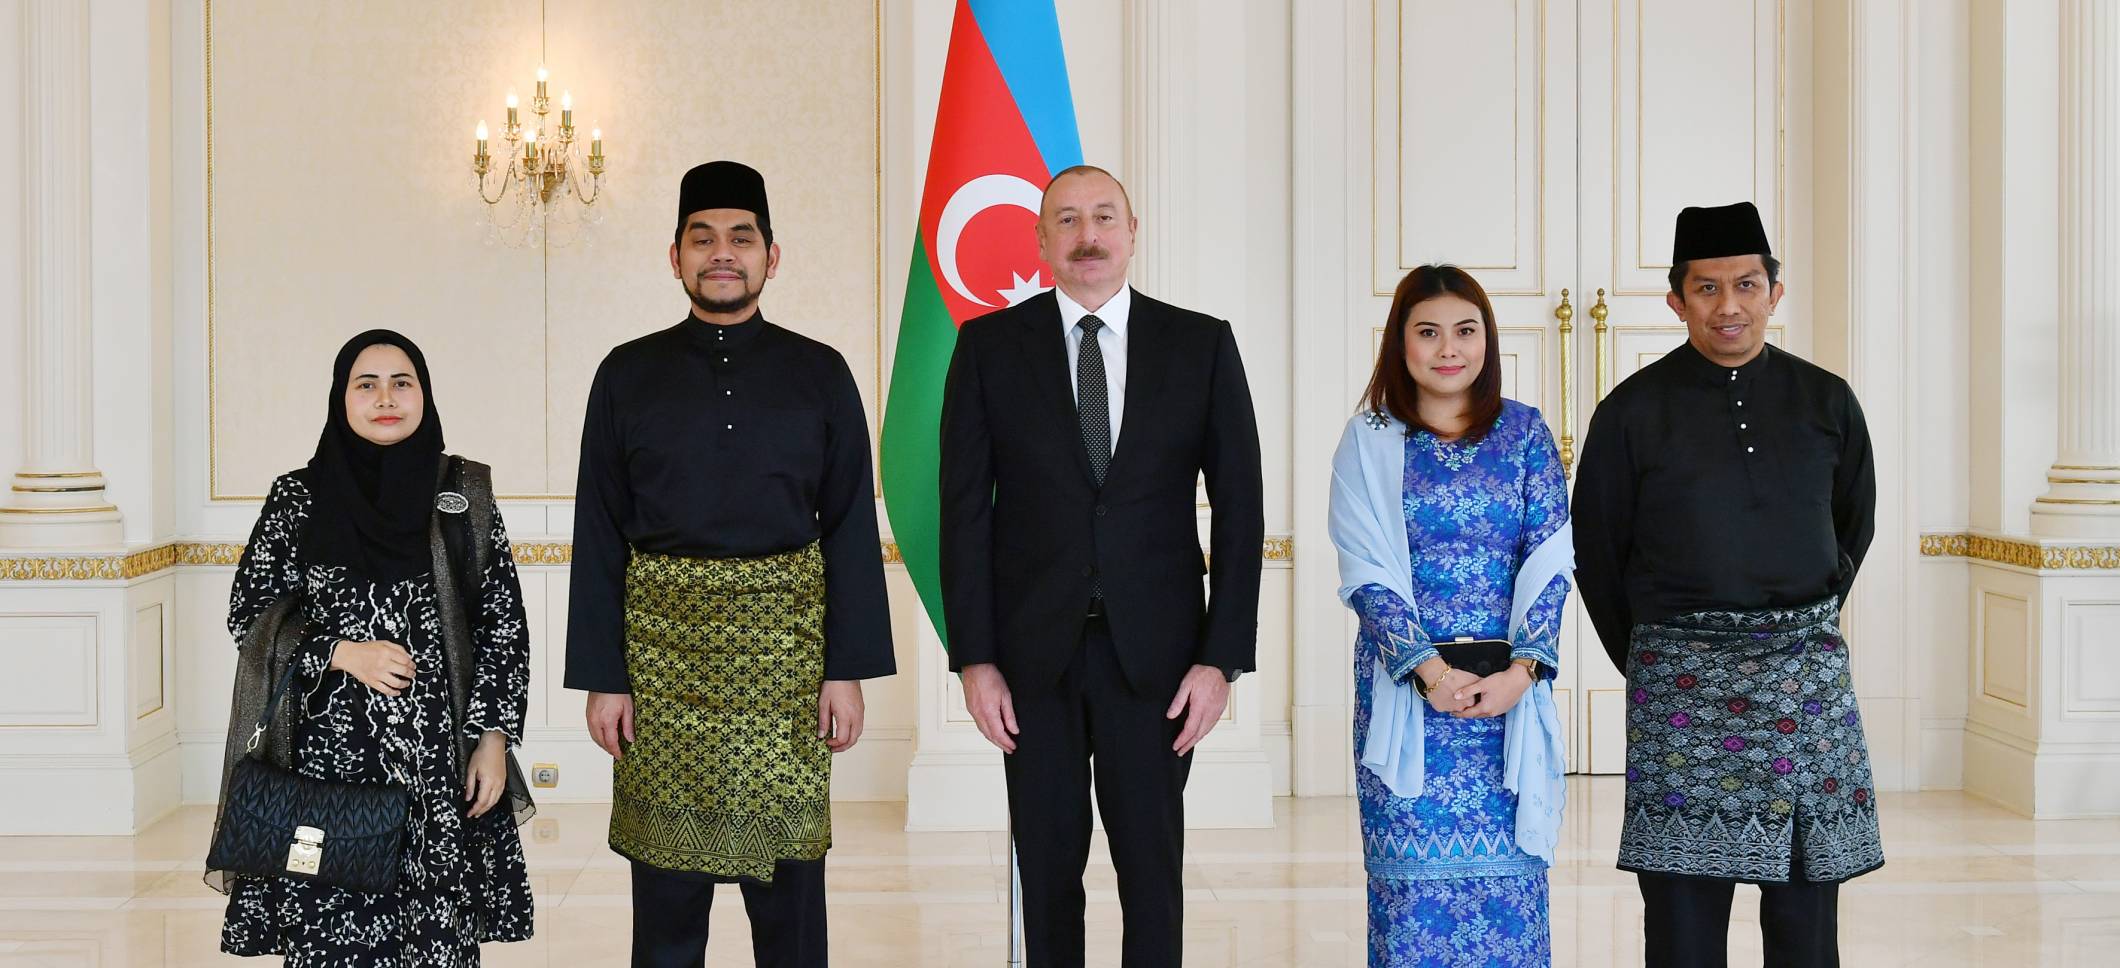 Ilham Aliyev accepted credentials of incoming ambassador of Malaysia to Azerbaijan